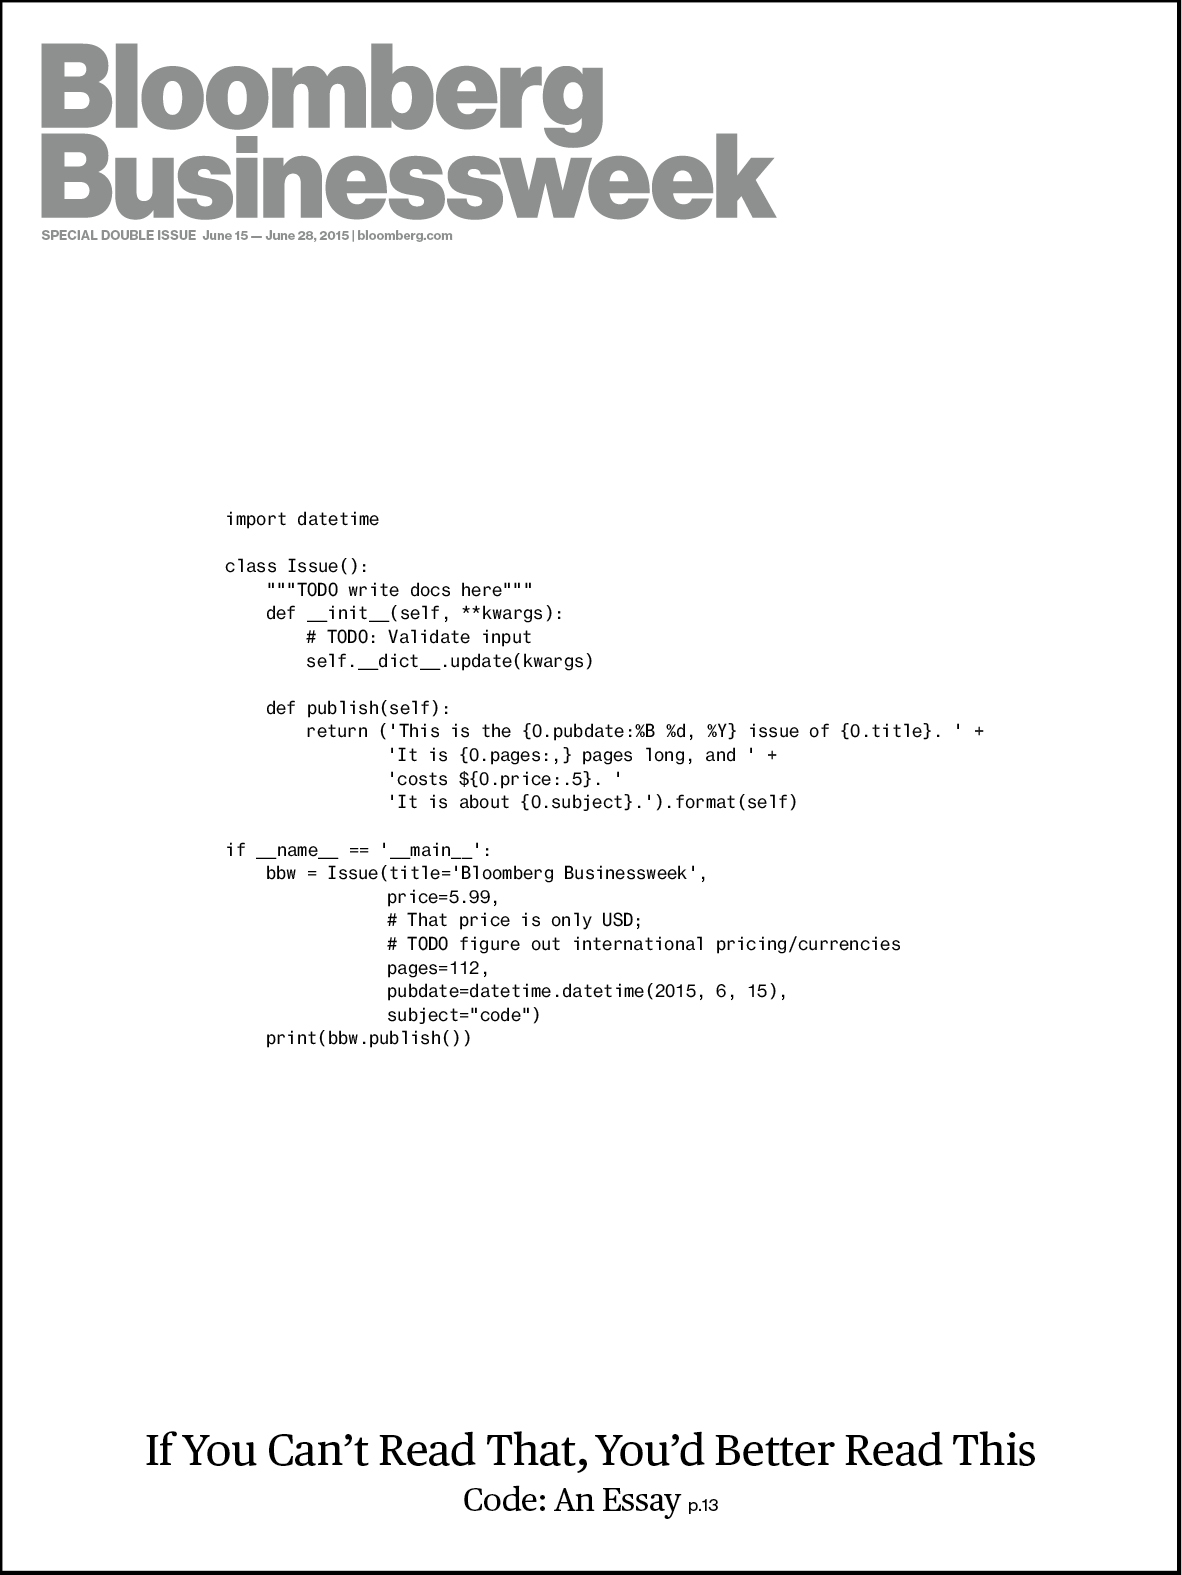 An image-free magazine cover that displays code and then at the bottom displays, "If you can't read this, you better read this: code: an essay, p. 13"